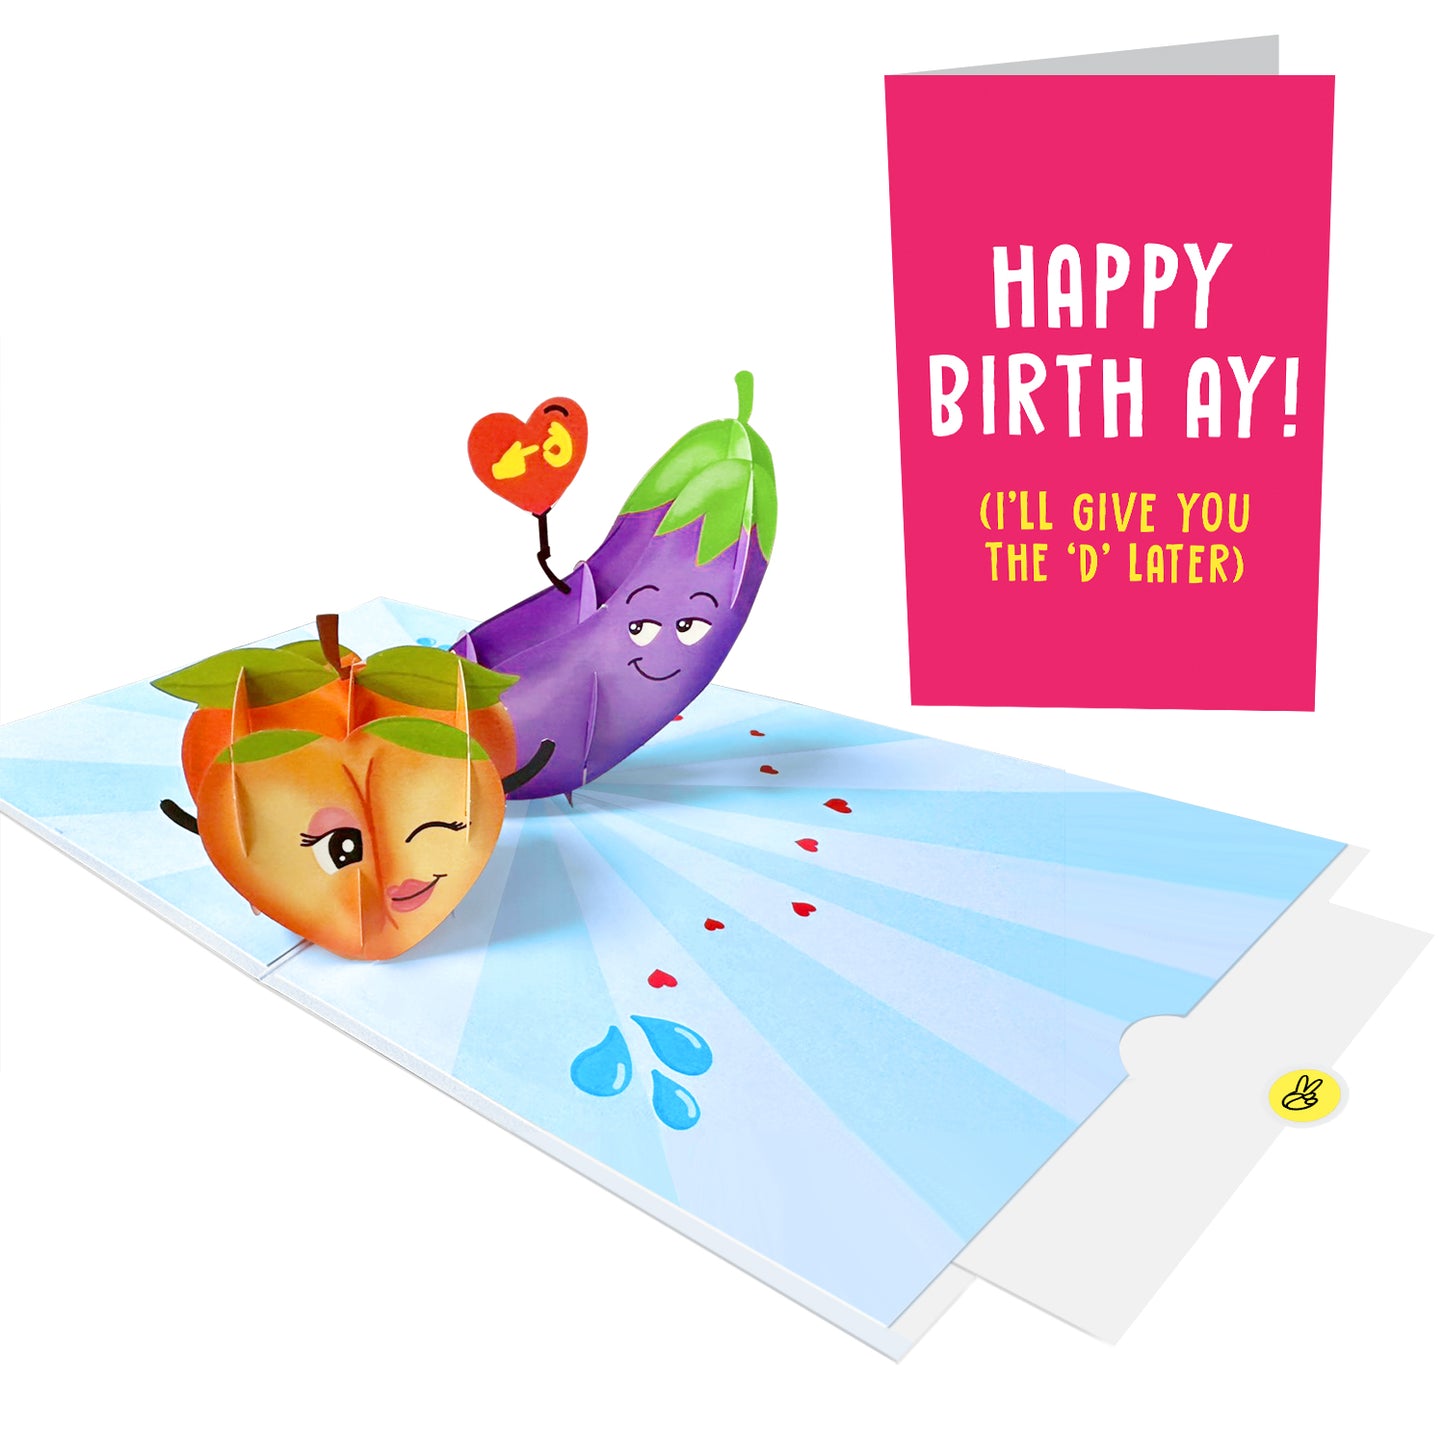 Funny Naughty Pop Up Card - I'll Give You The D - Aubergine - Eggplant - Peach - Dirty Pop Up Card - For Men Women Boys Girls Him HerPop Up Card - Gamer - For Men Women Boys Girls Him Her